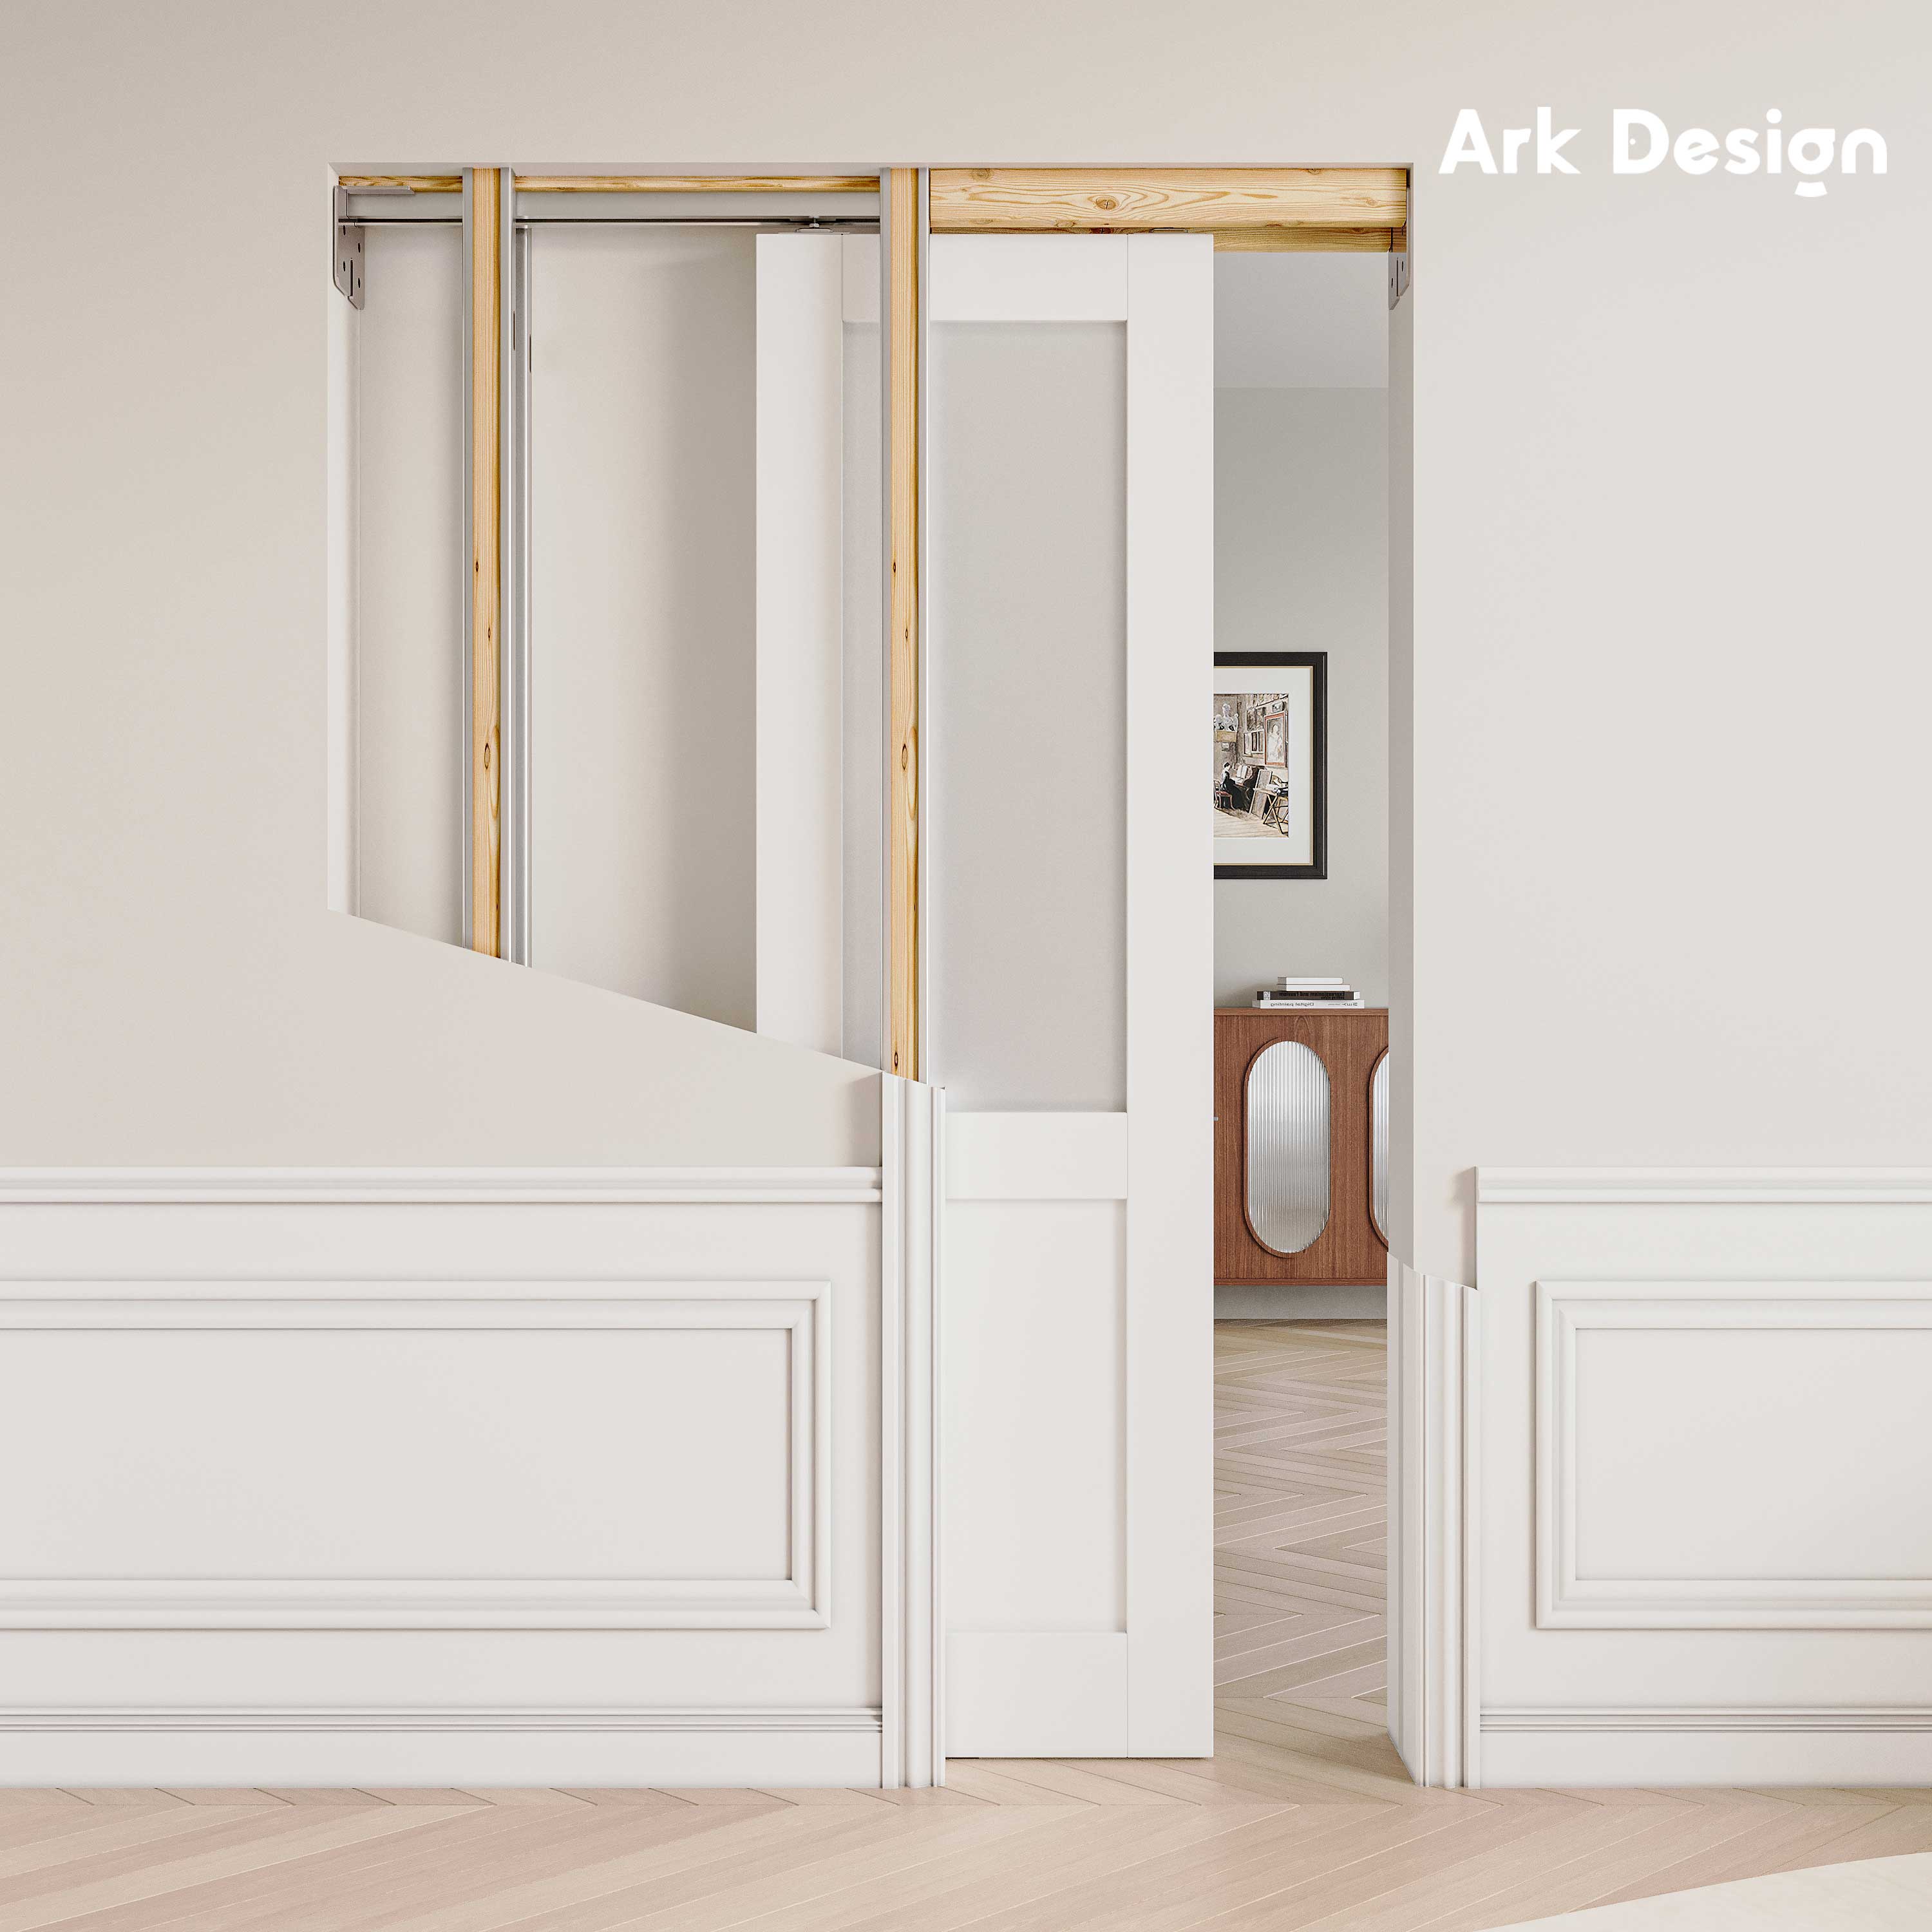 Ark Design Half Lite Tempered Frosted Glass Pocket Door with Hardware Kit & Frame, Solid Core MDF Wood & Paint-grade Finished, White